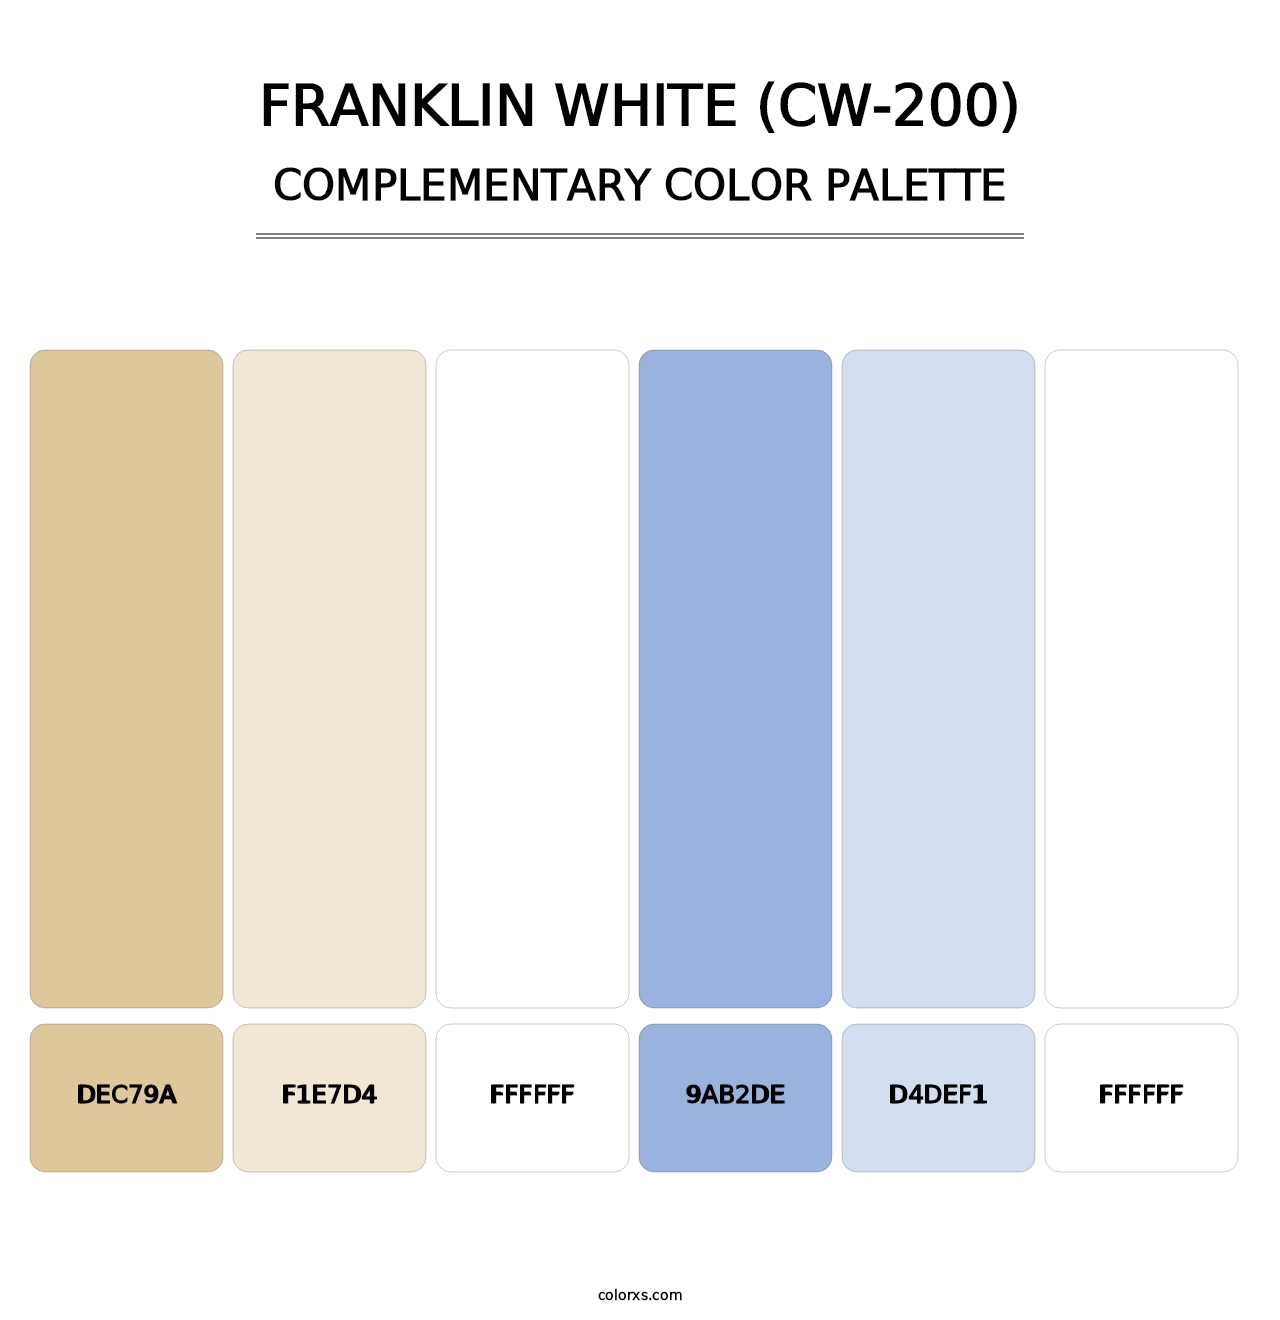 Franklin White (CW-200) - Complementary Color Palette